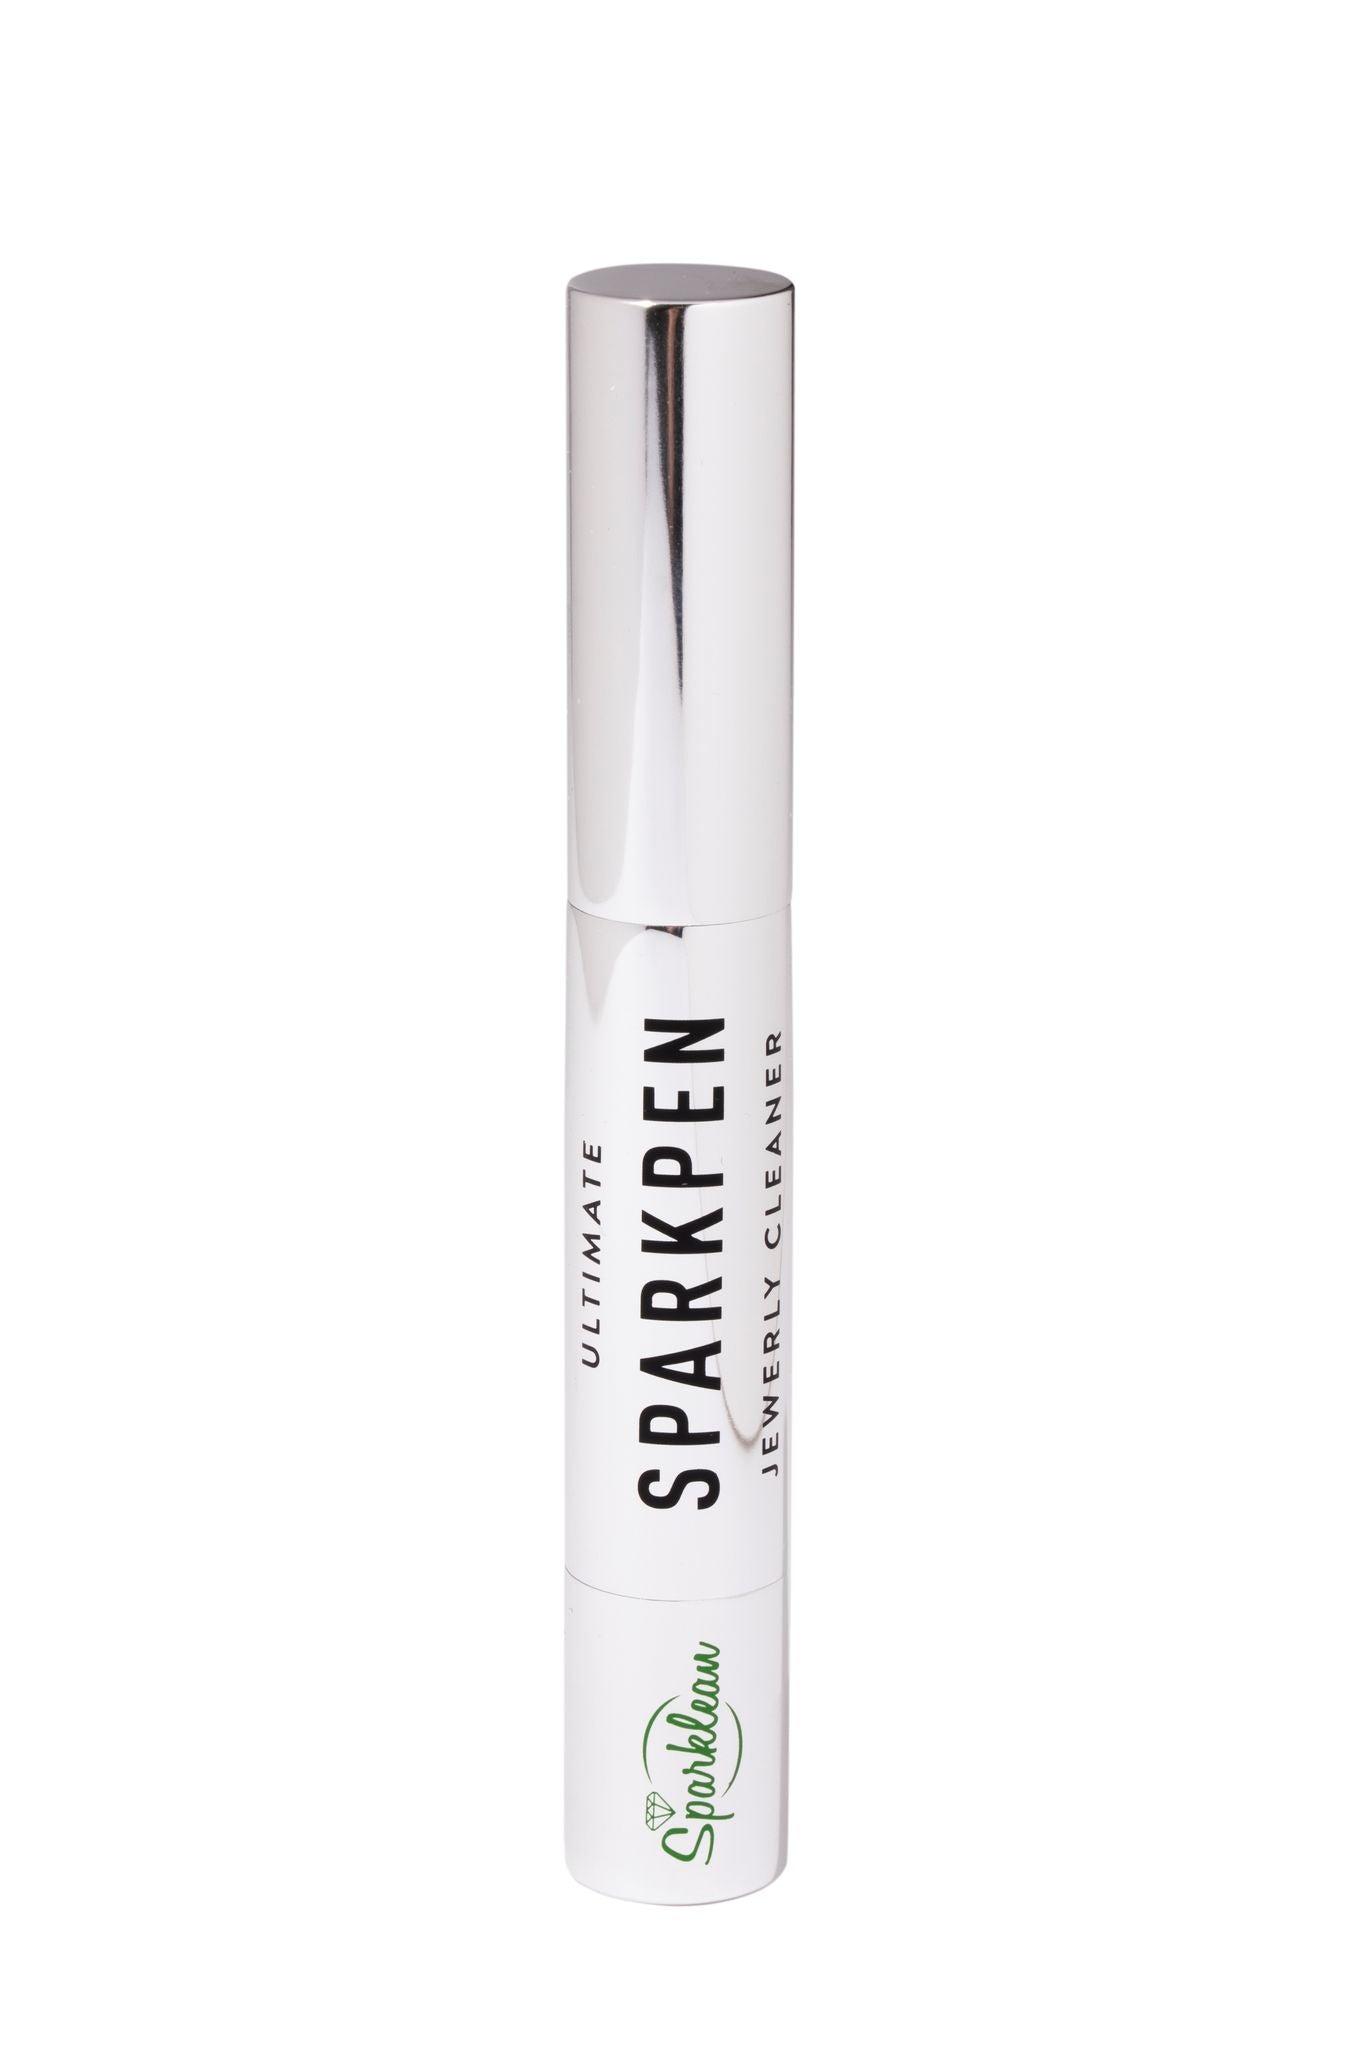 Sparkpen: Eco-Friendly Fine-Tip Jewelry Cleaner